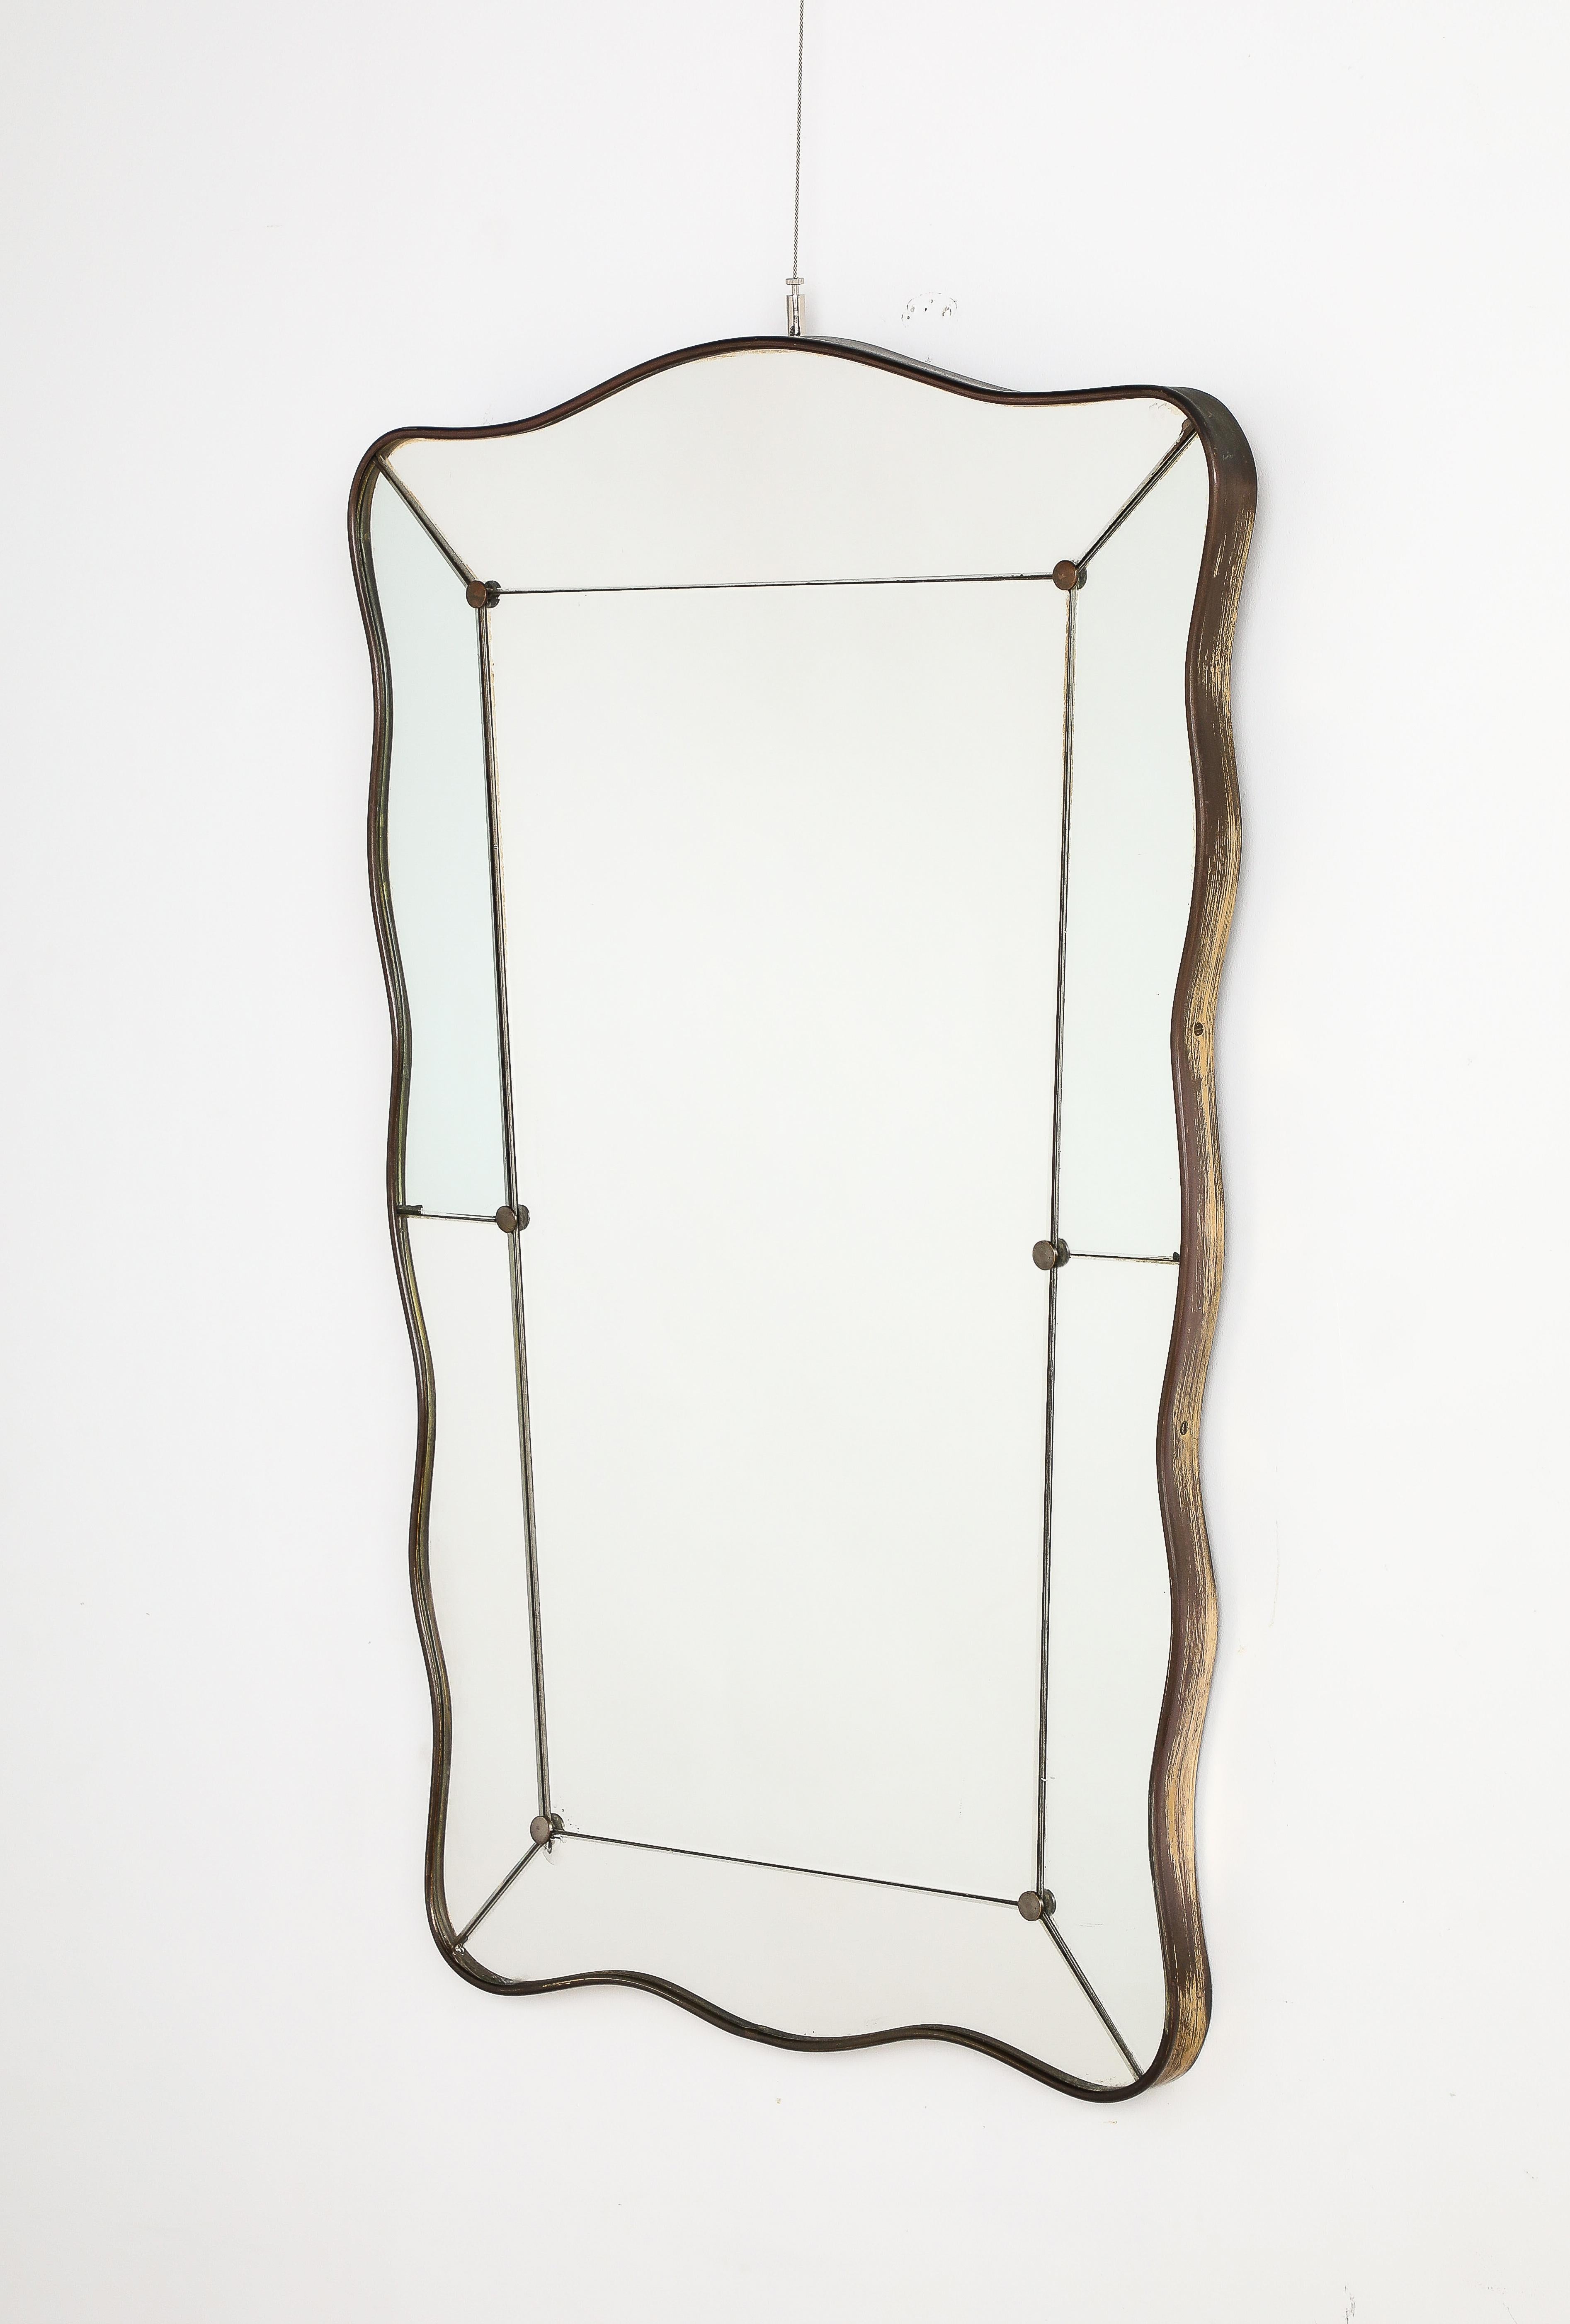 A wonderful scalloped shaped and slightly tapered brass wall mirror by the iconic mirror and glass design company Fontana Arte, Milan, circa 1940.  The rectangular inset glass panel is bordered by segmented mirror glass plates with metal posts;